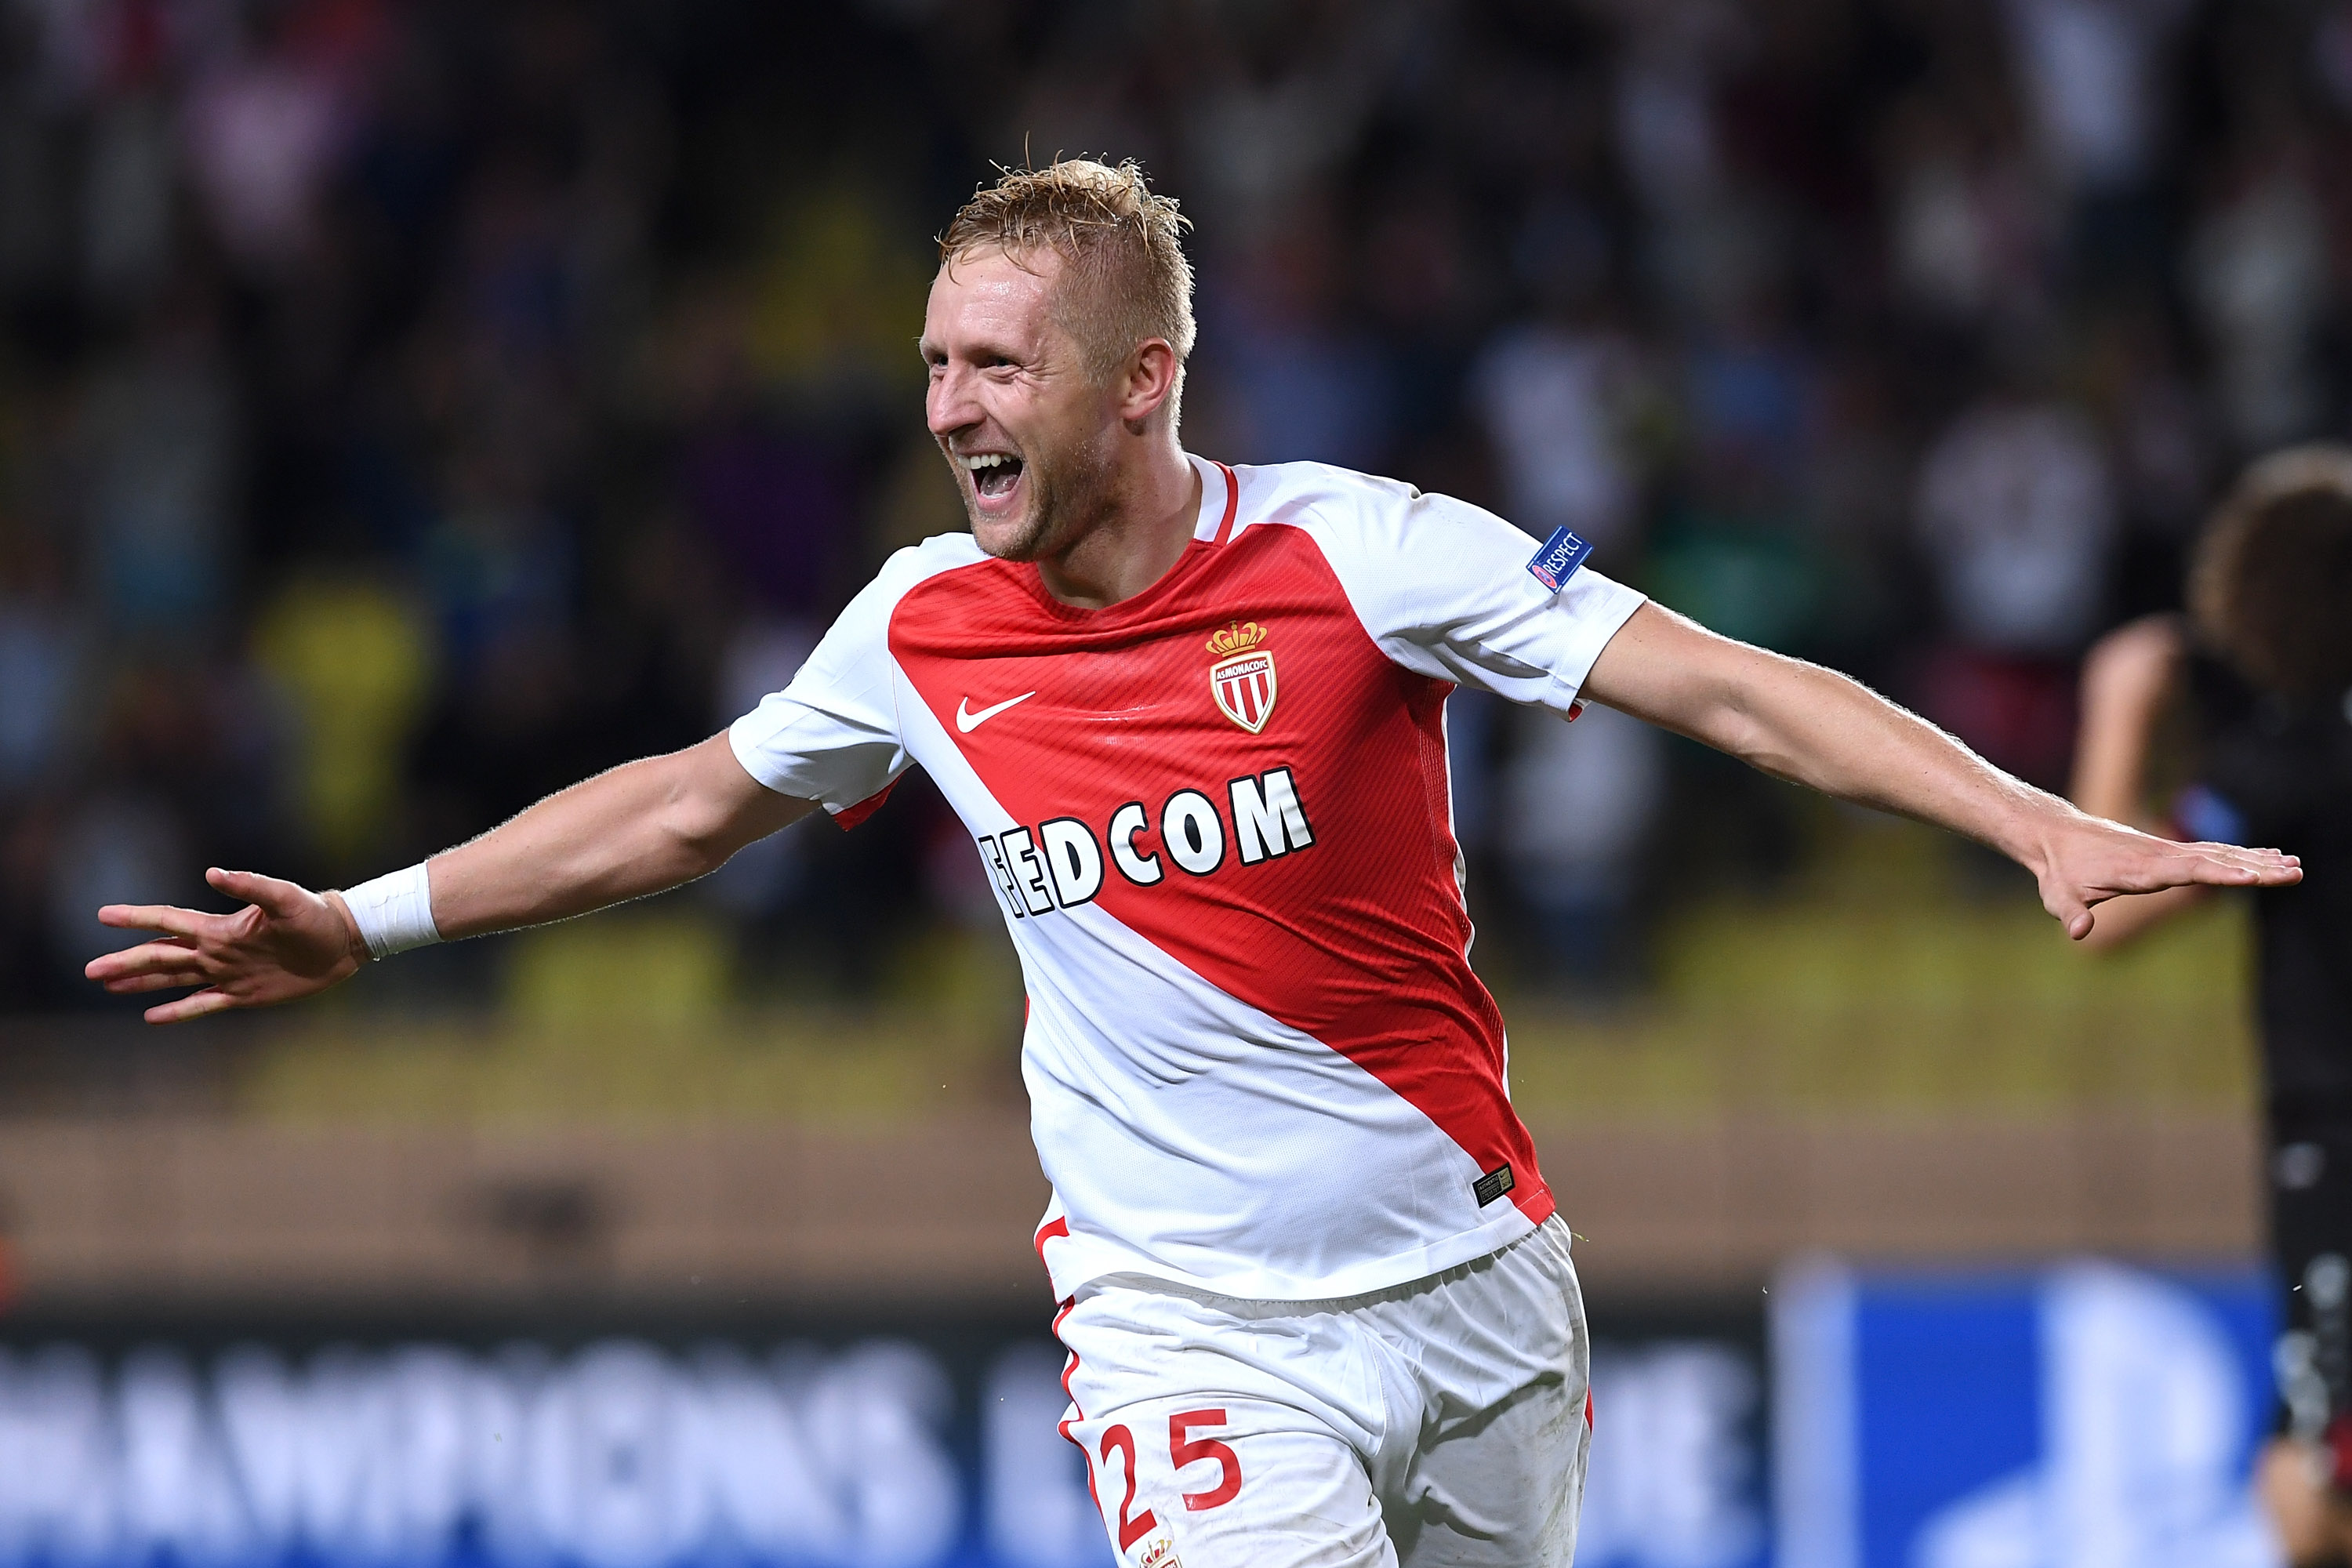 MONACO - SEPTEMBER 27:  Kamil Glik (C) of AS Monaco FC celebrates after scoring the equalizer goal during the UEFA Champions League Group E match between AS Monaco FC and Bayer 04 Leverkusen at Louis II Stadium on September 27, 2016 in Monte Carlo, Monaco.  (Photo by Valerio Pennicino/Getty Images)